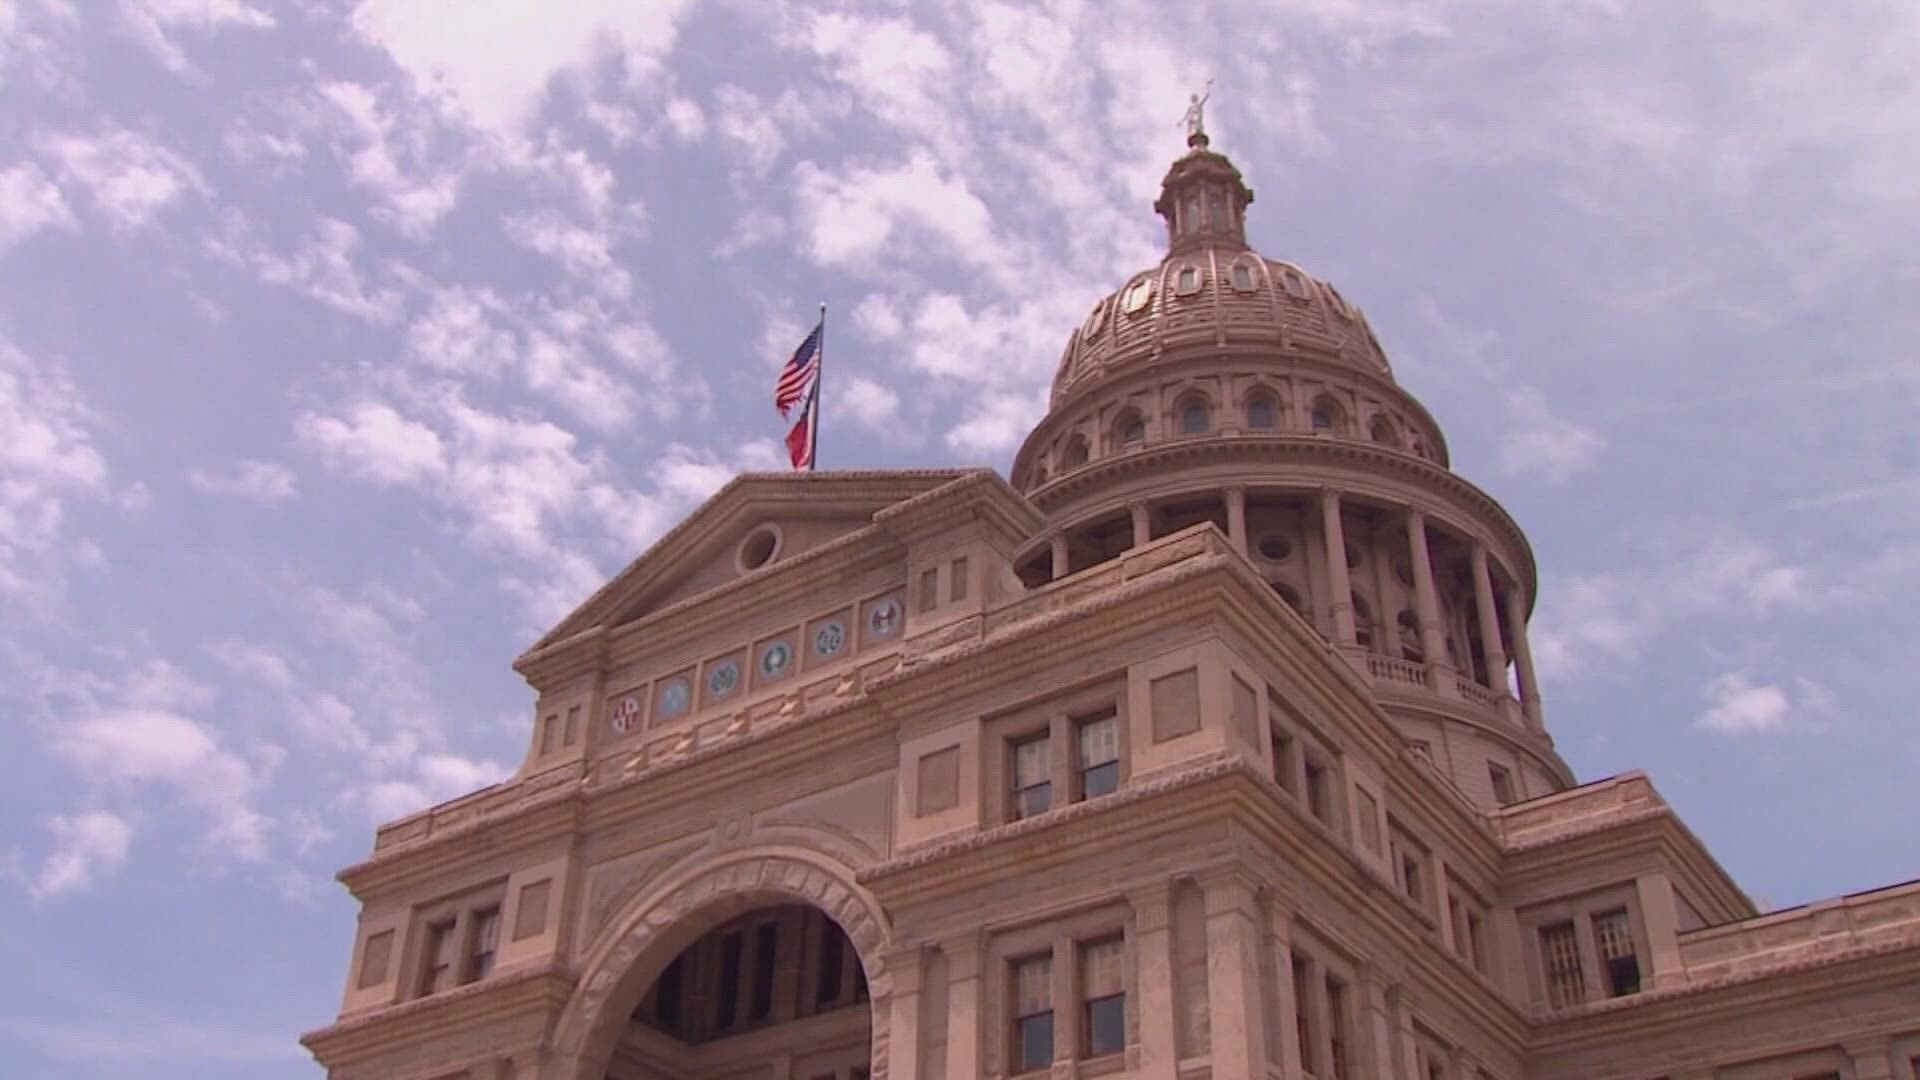 Law makers have submitted 1600 bills that address a wide variety of issues Texans have been facing.